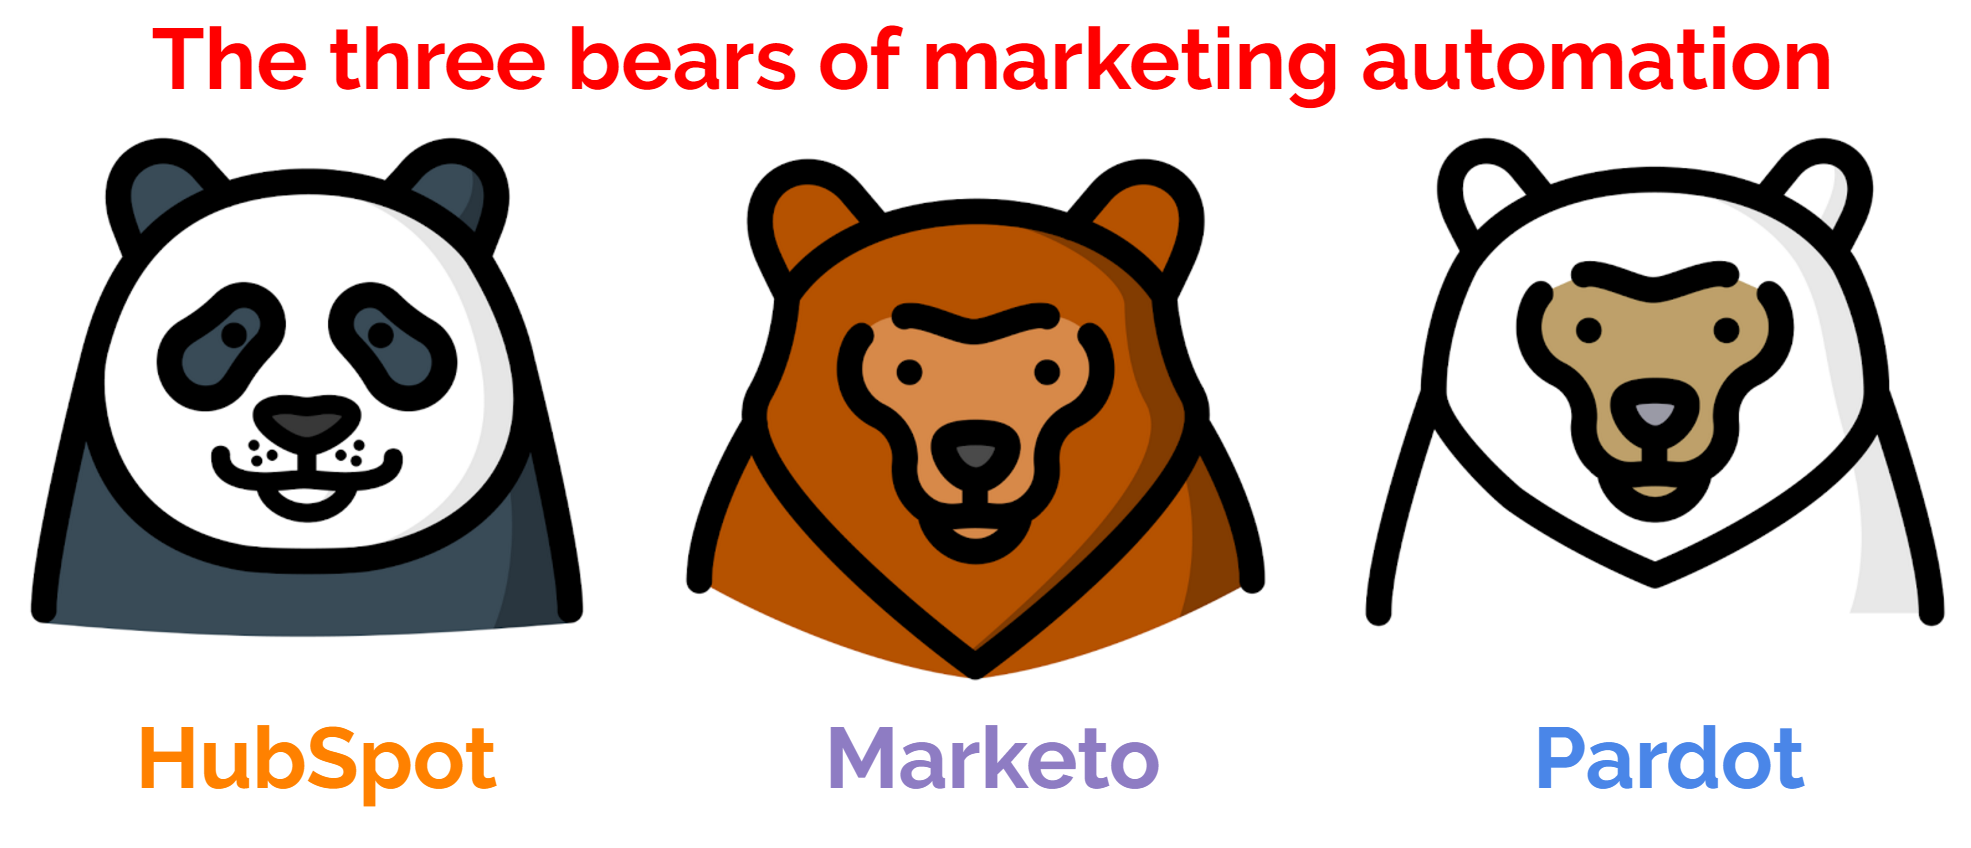 3 Bears of Marketing Automation.png